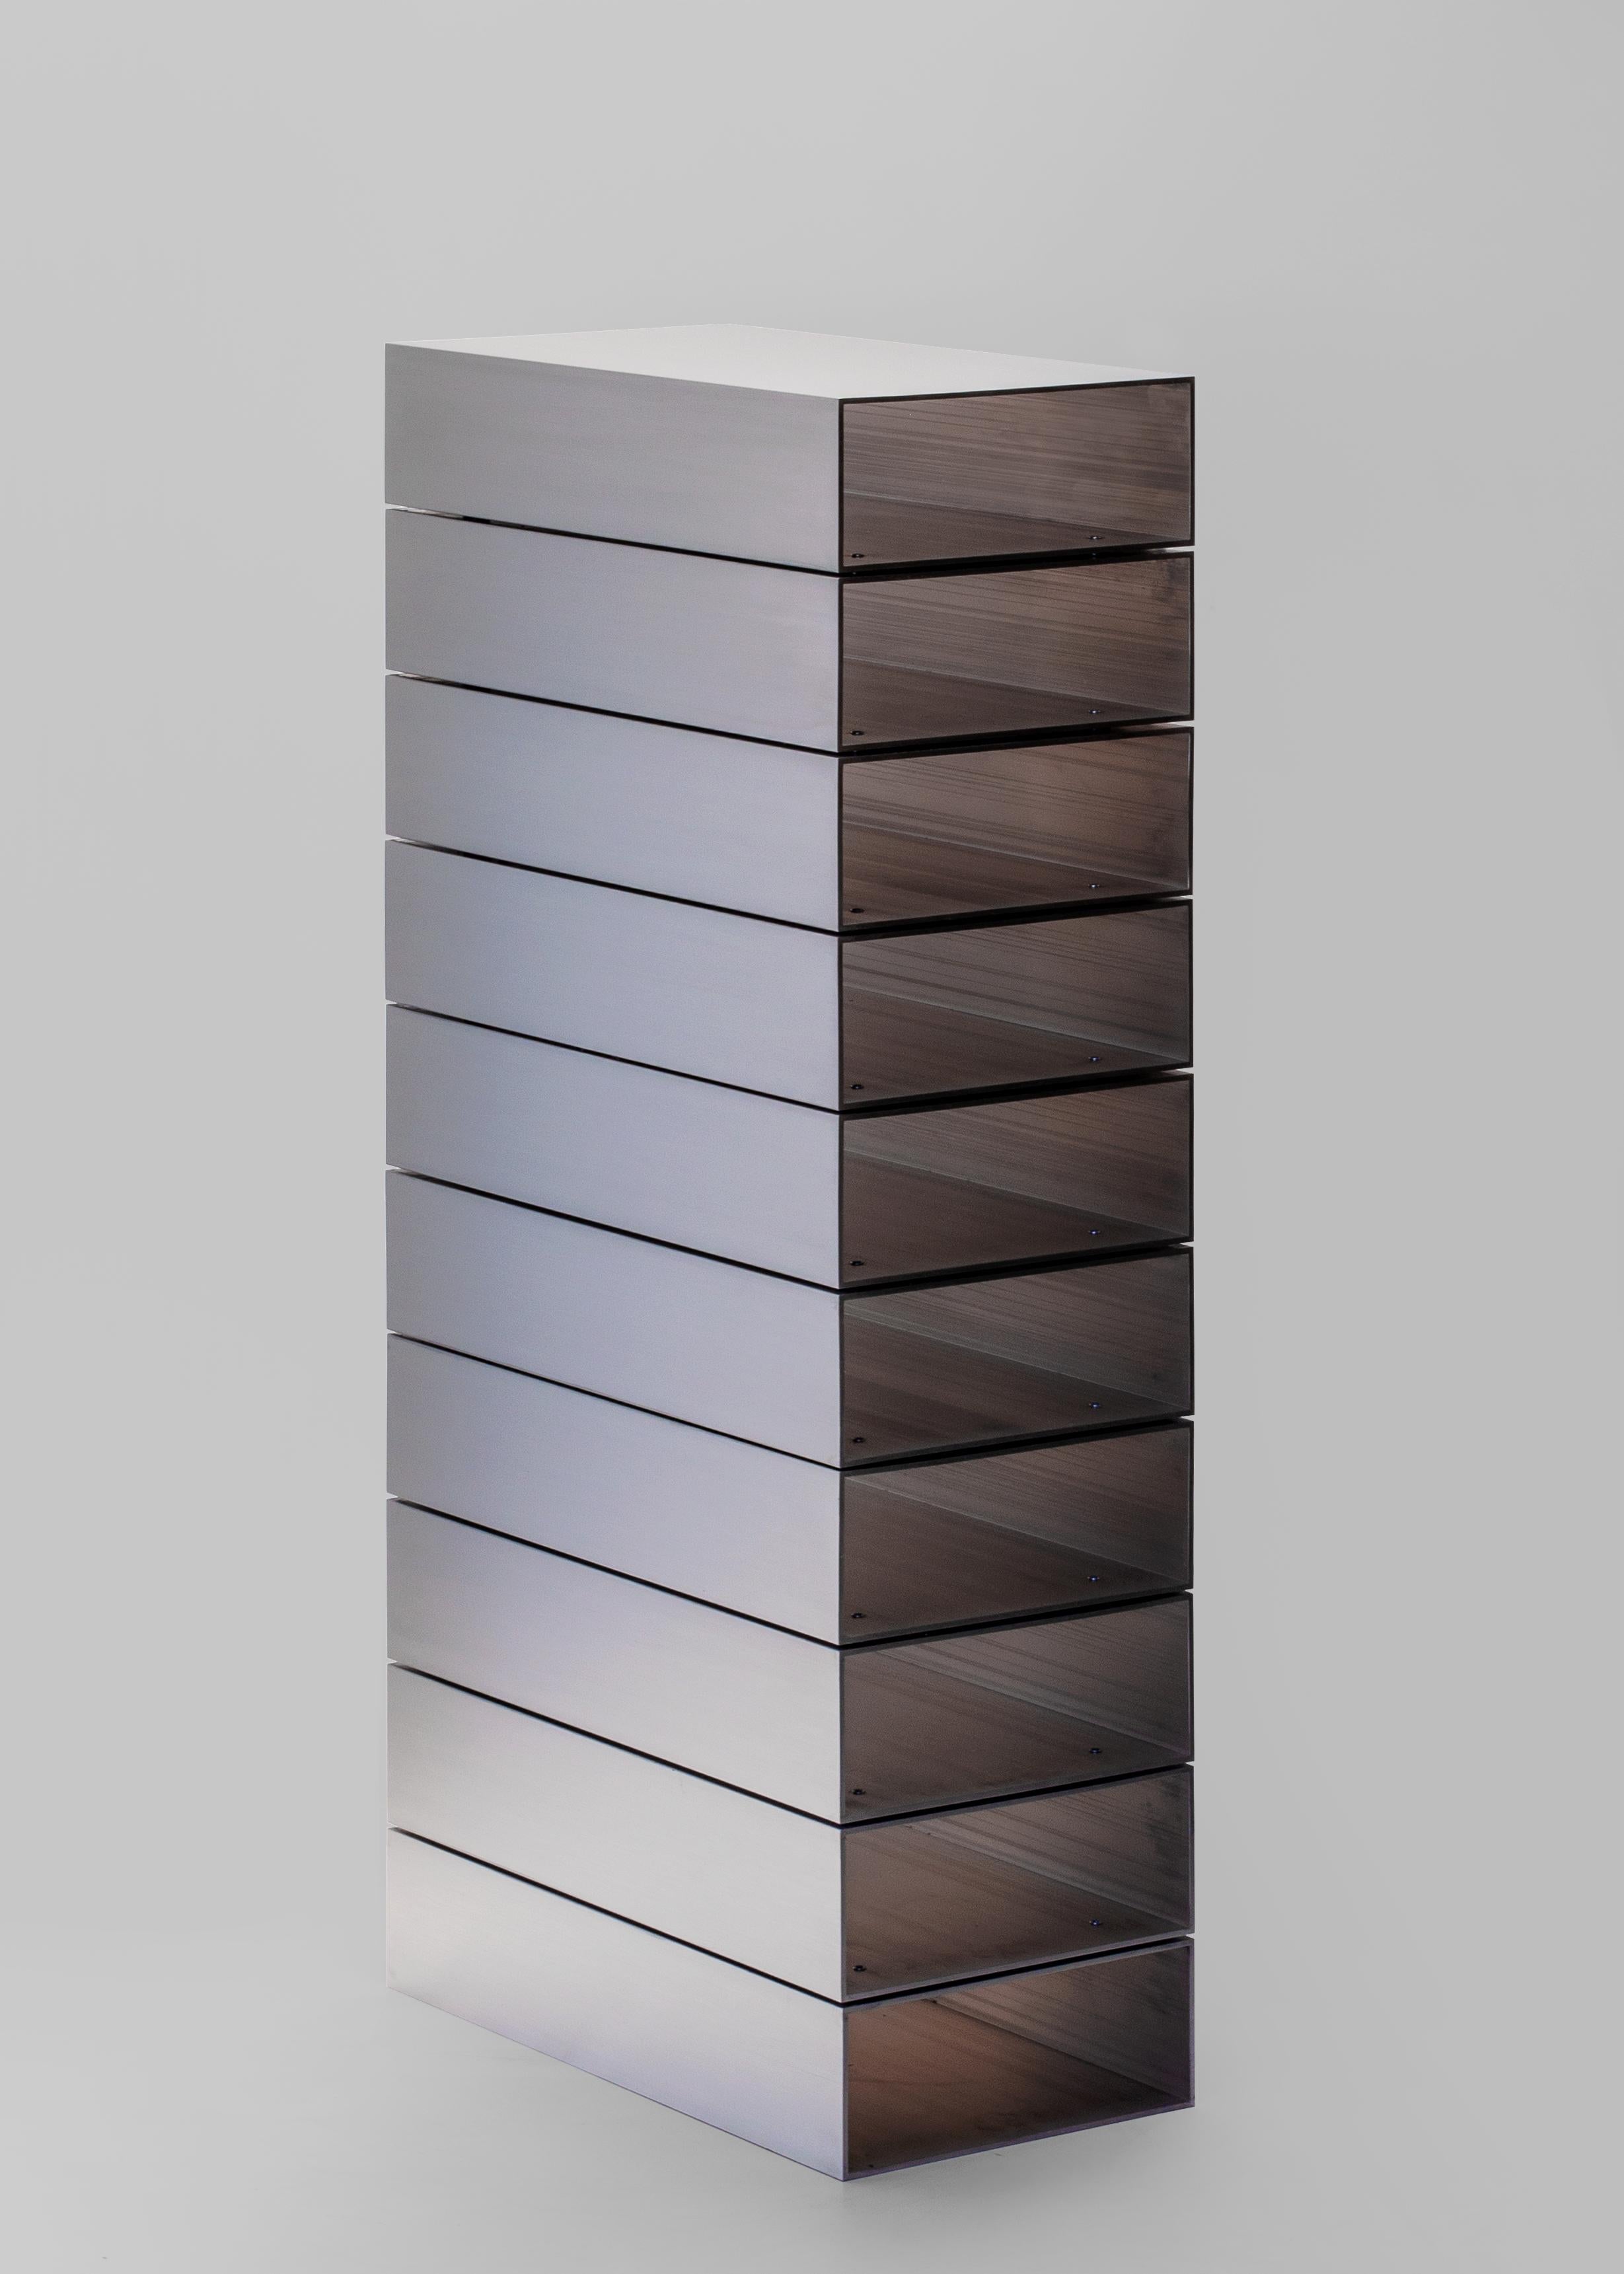 Contemporary Stack Shelf in Brushed Aluminium by Johan Viladrich For Sale